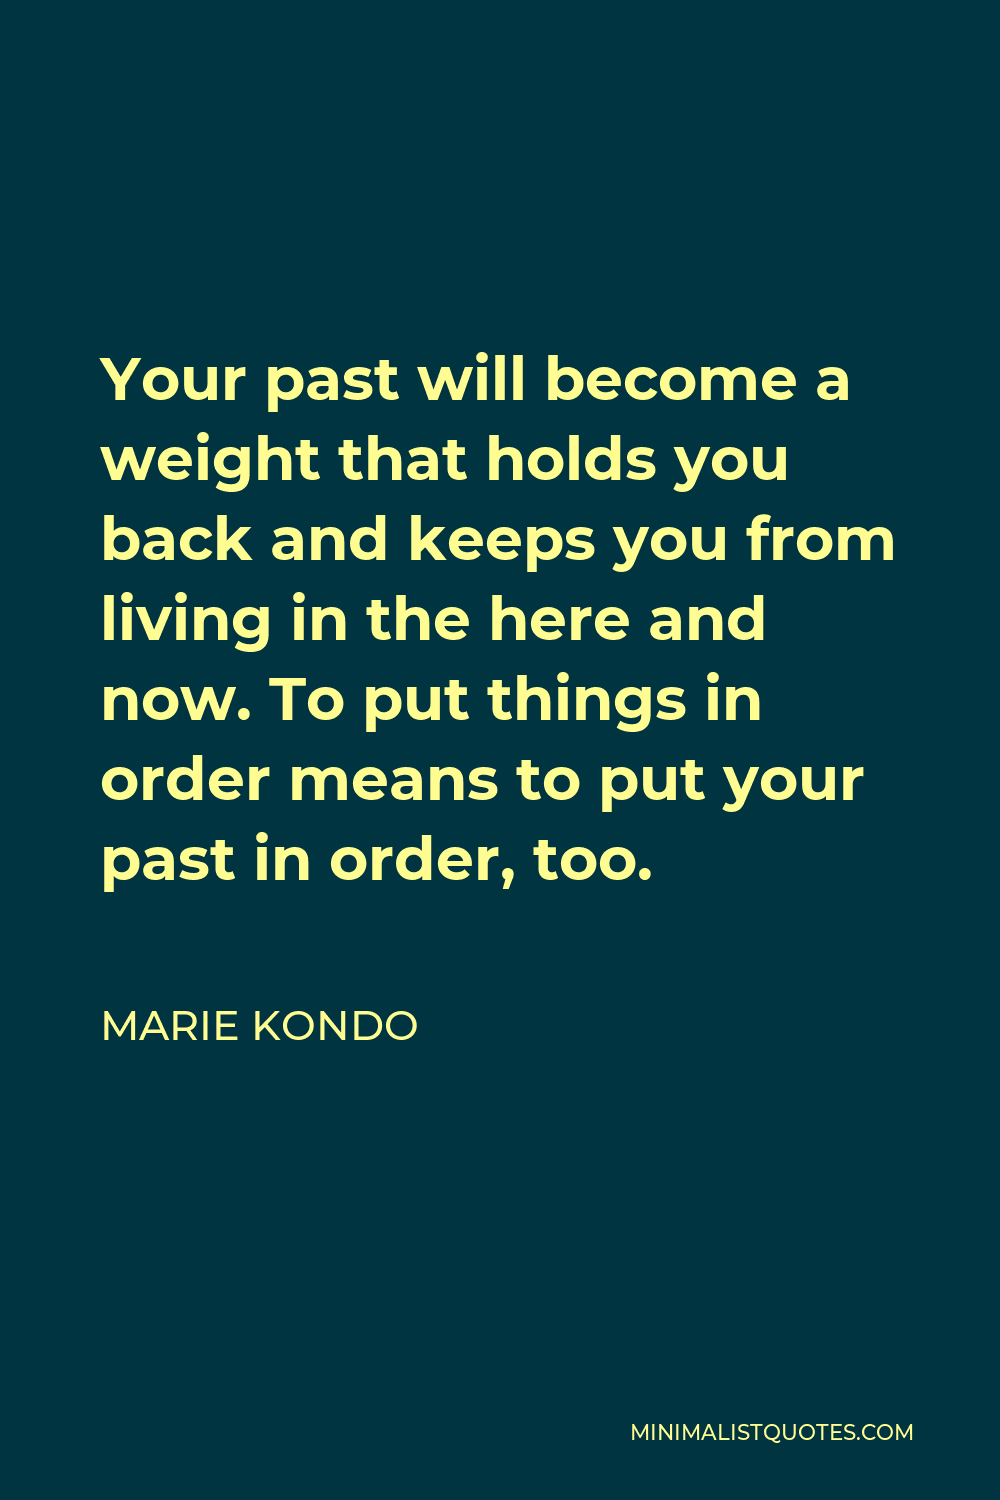 Marie Kondo Quote - Your past will become a weight that holds you back and keeps you from living in the here and now. To put things in order means to put your past in order, too.